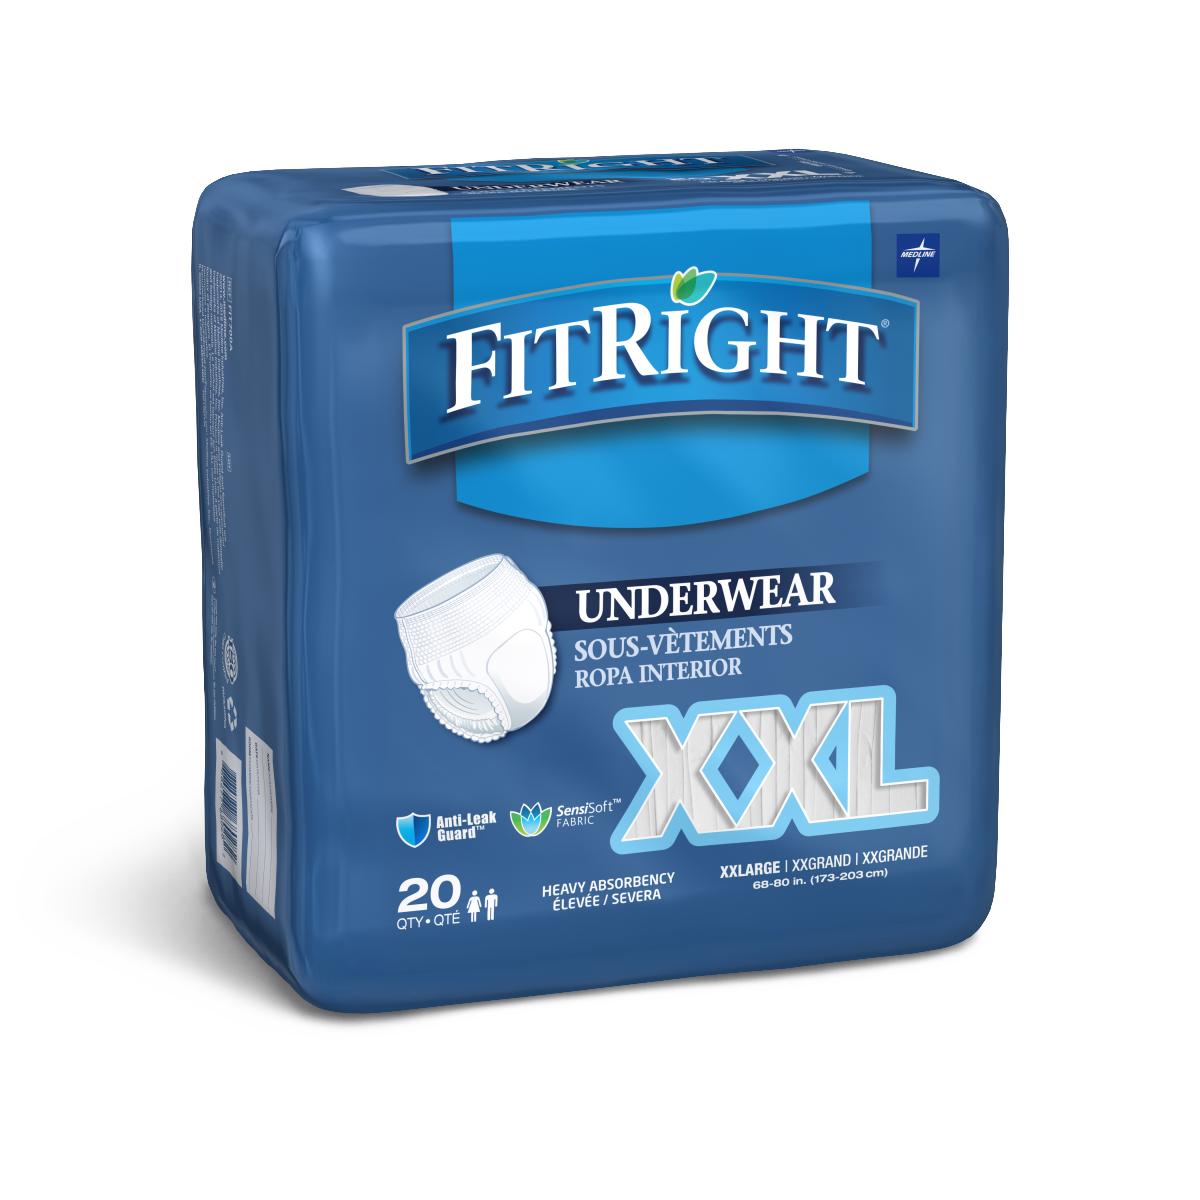 FitRight 2XL Size Protective Underwear,2X-Large Bag of 20